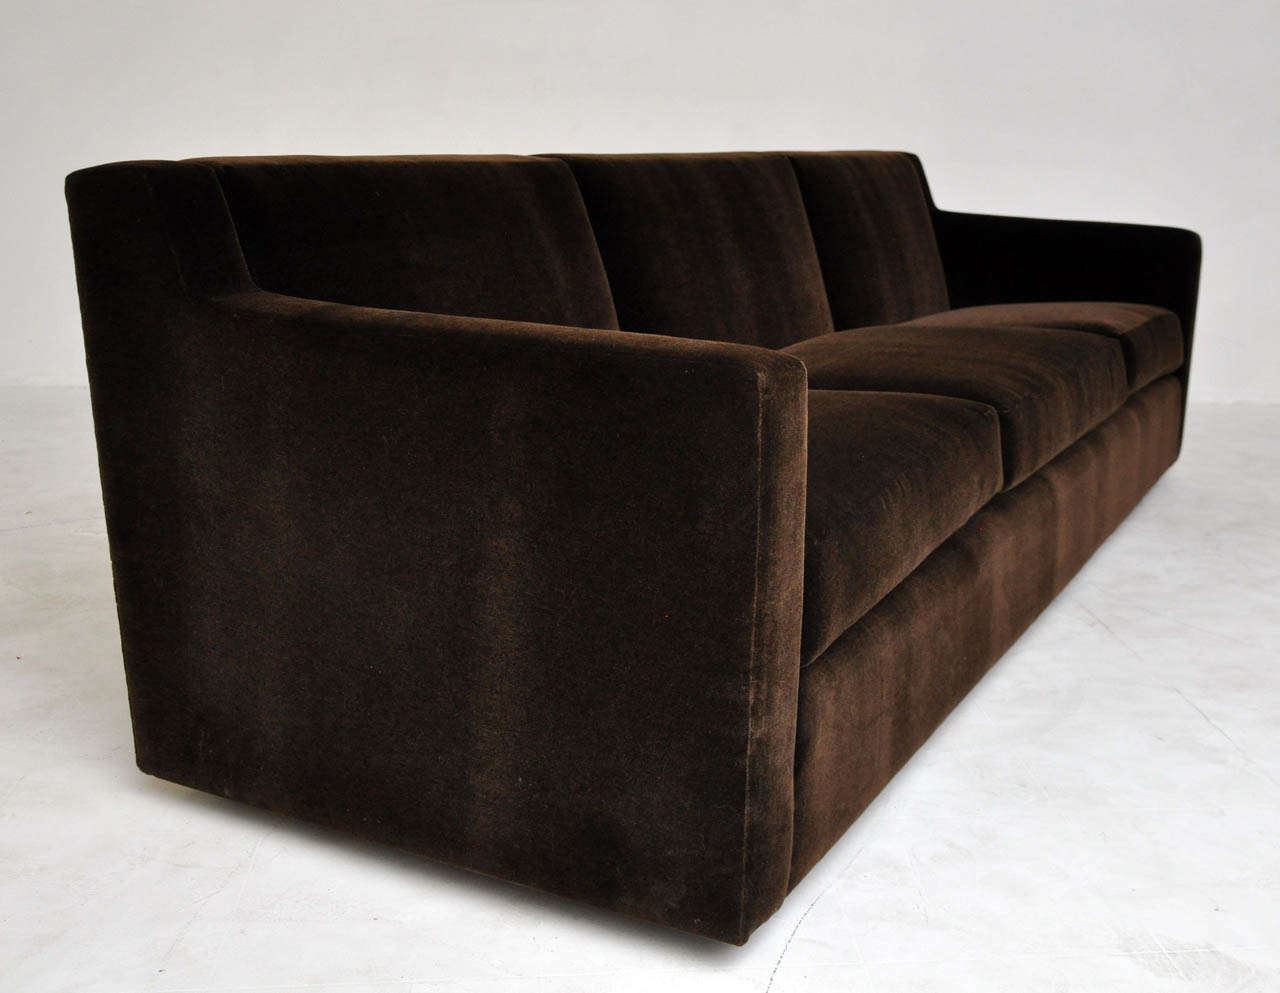 8ft sofa by Edward Wormley for Dunbar.  Fully restored.  Newly upholstered in chocolate color mohair.